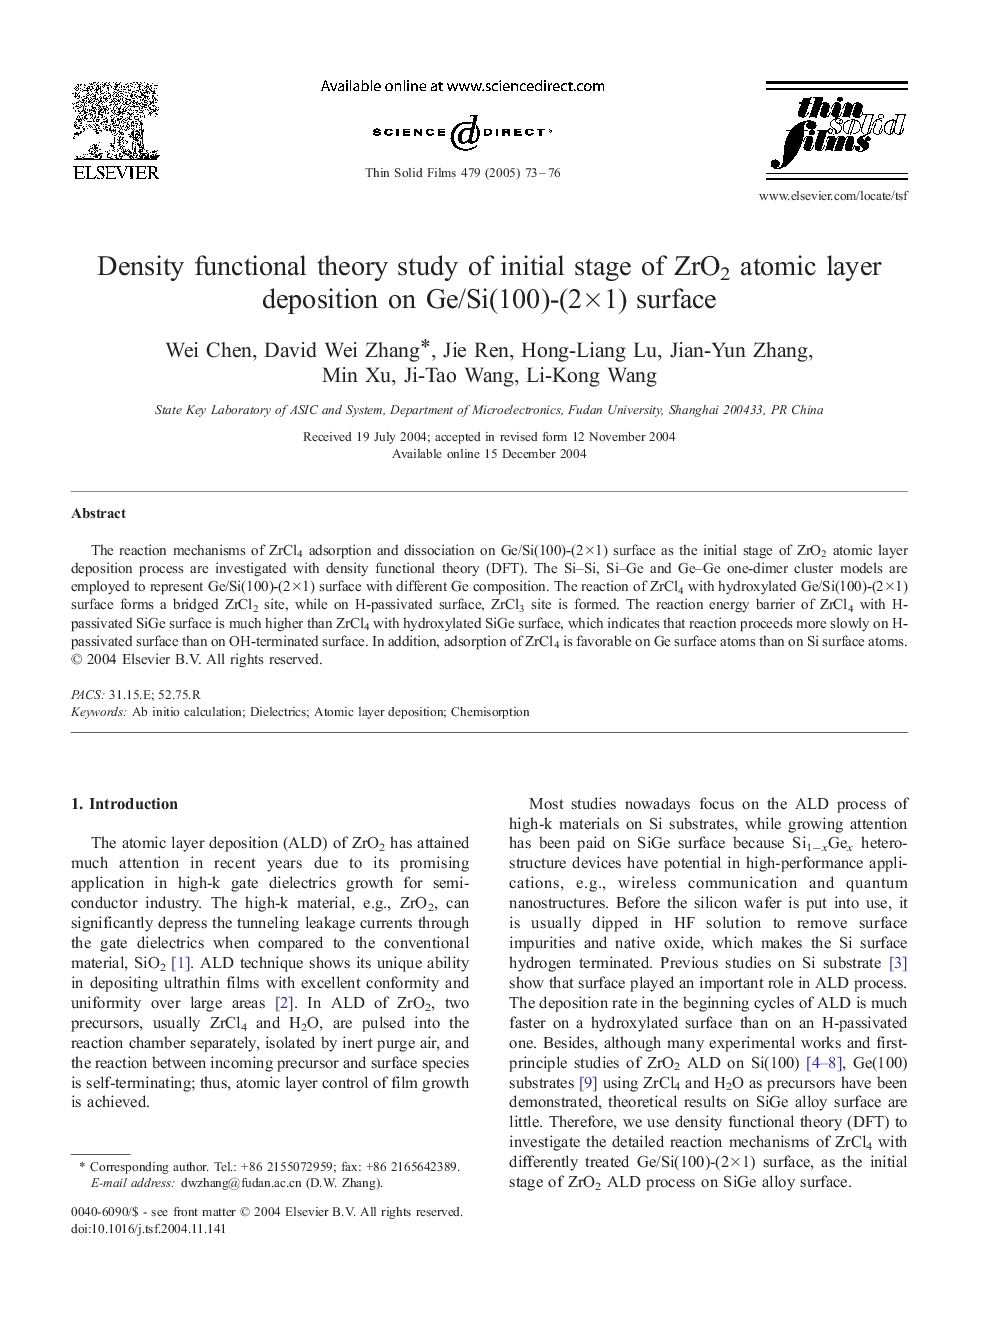 Density functional theory study of initial stage of ZrO2 atomic layer deposition on Ge/Si(100)-(2Ã1) surface